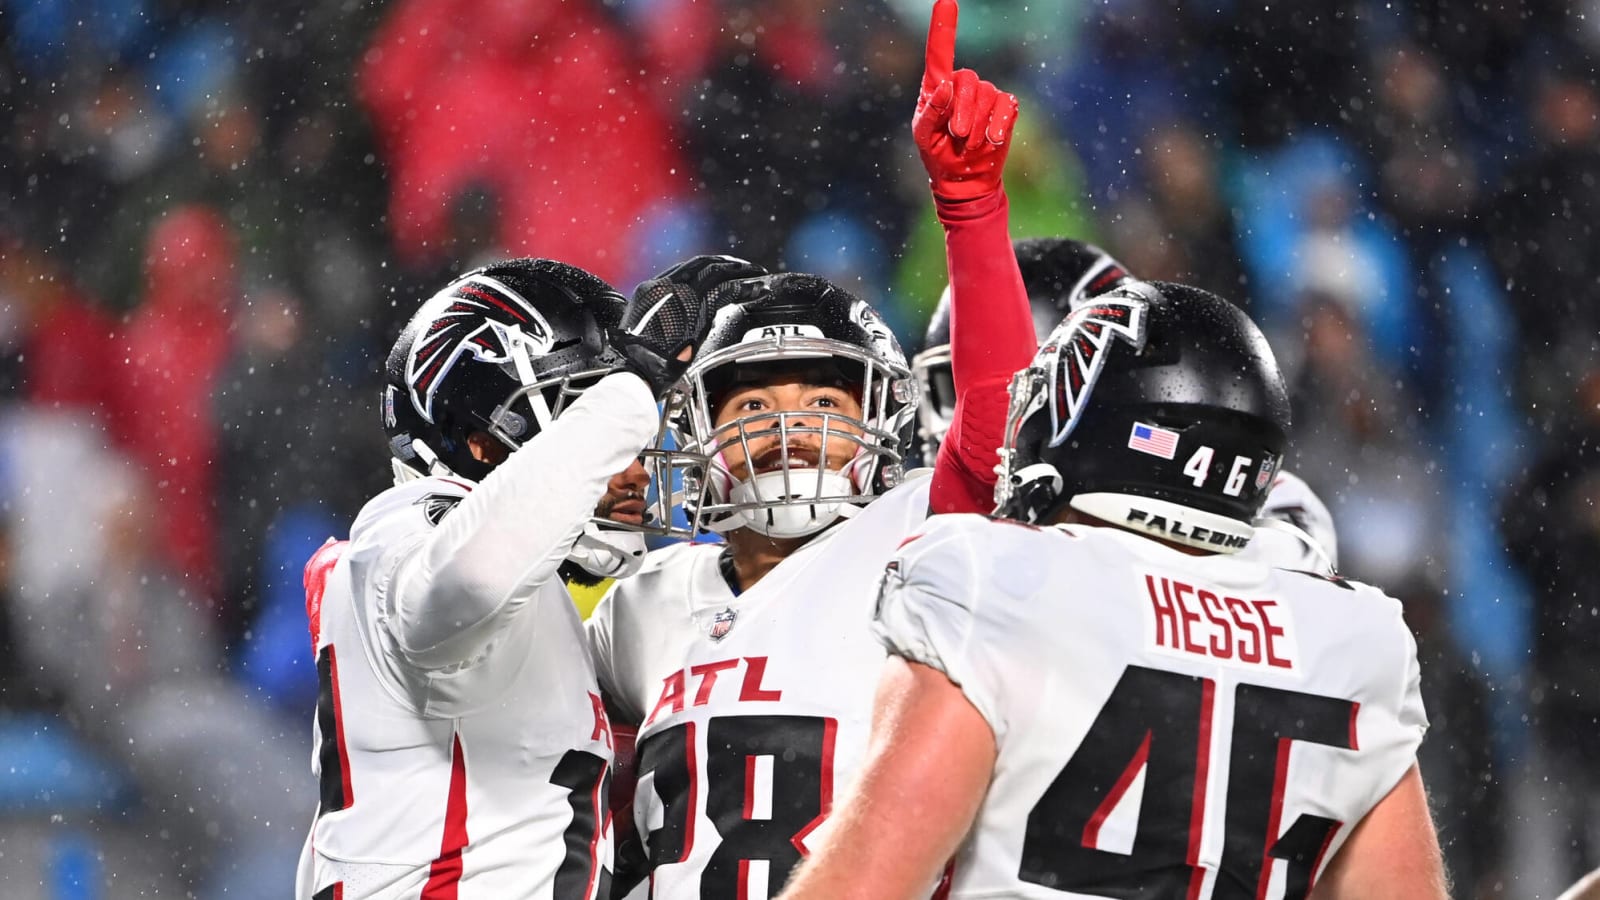 Former Falcons special teams mainstay finds new home in free agency